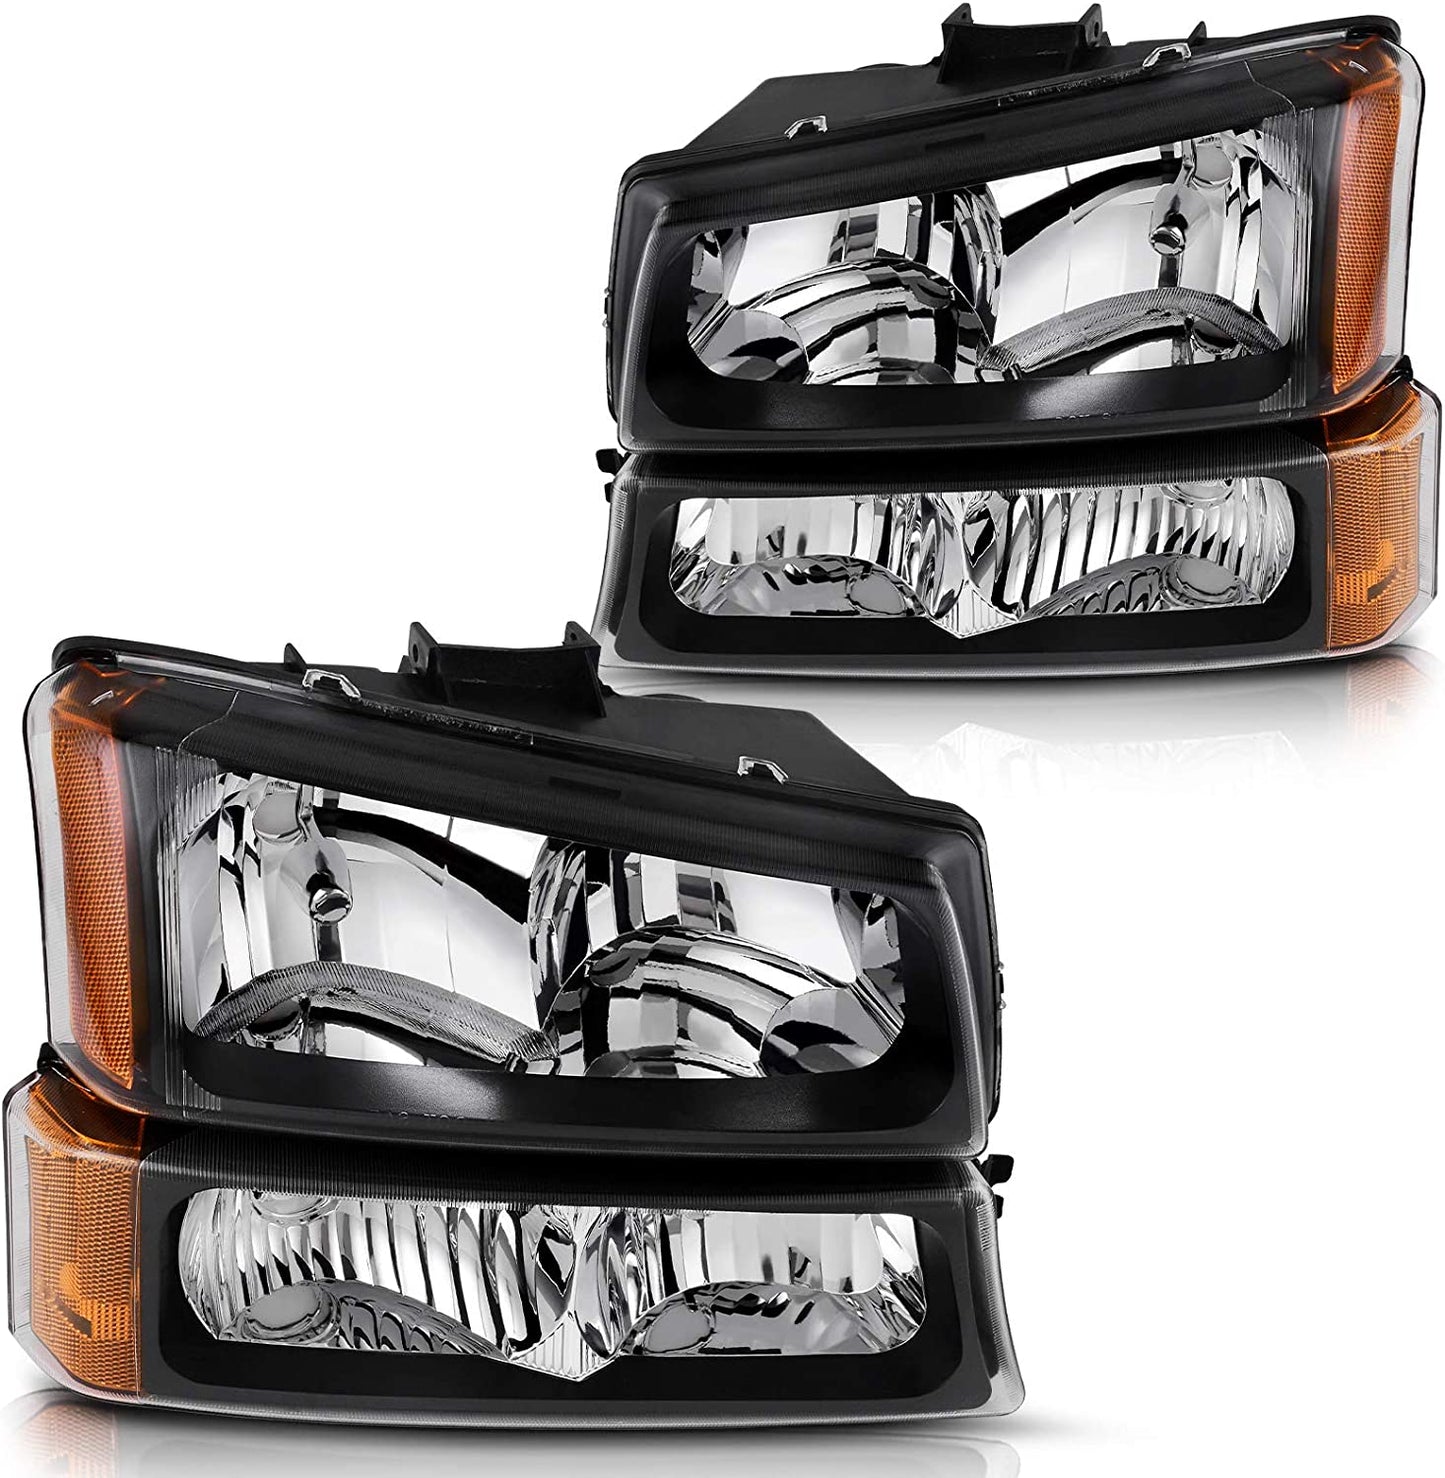 DWVO Headlight Assembly Compatible with Chevy Silverado Avalanche